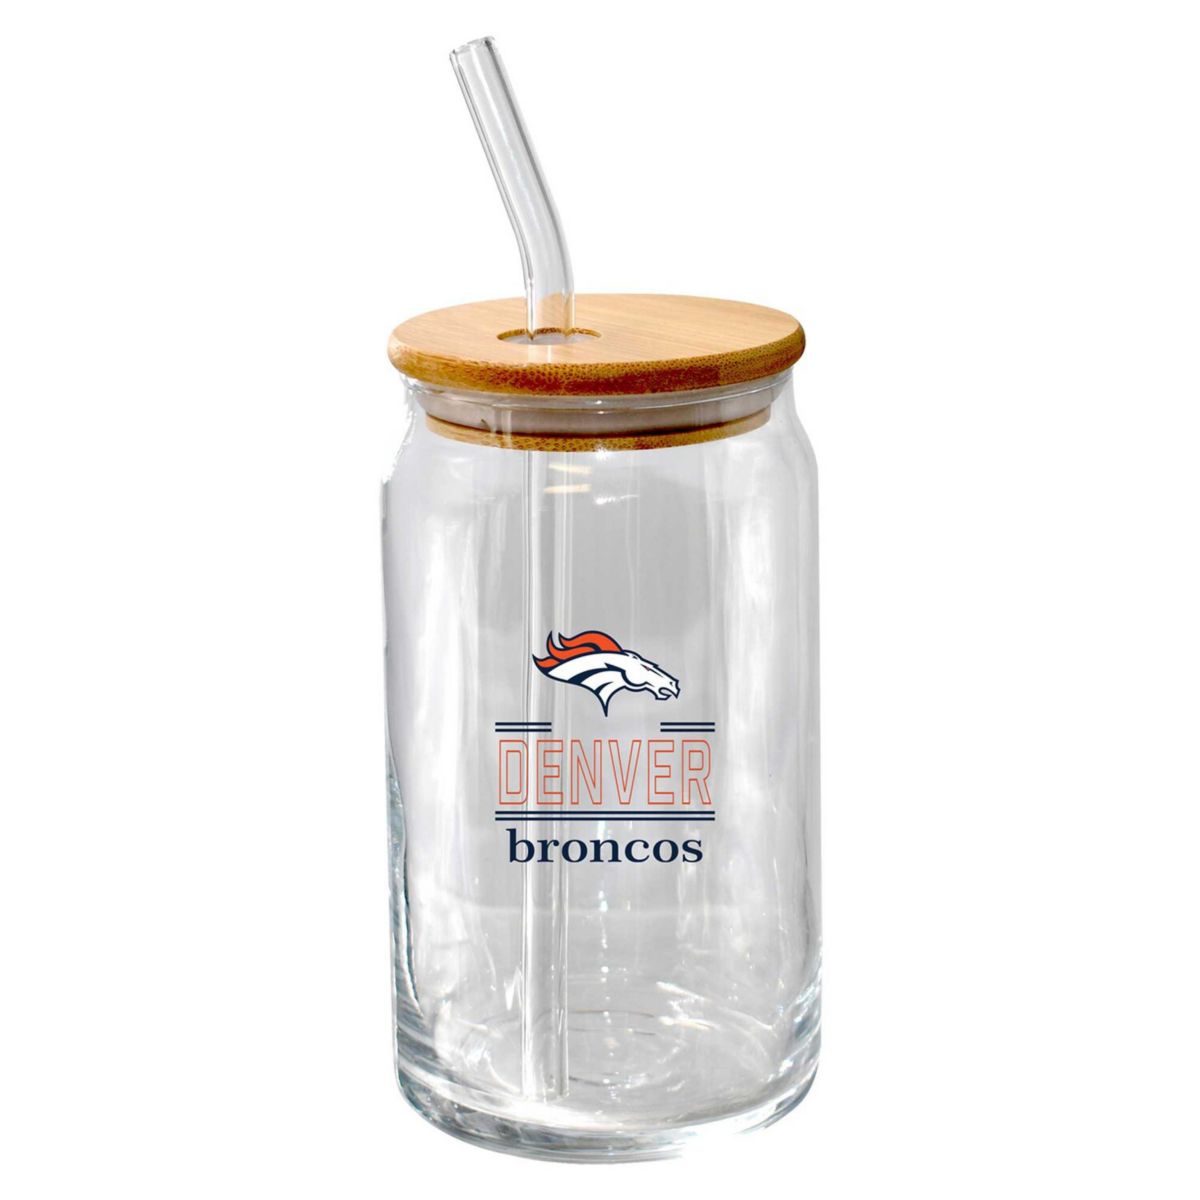 The Memory Company Denver Broncos 16oz. Classic Crew Beer Glass with Bamboo Lid The Memory Company